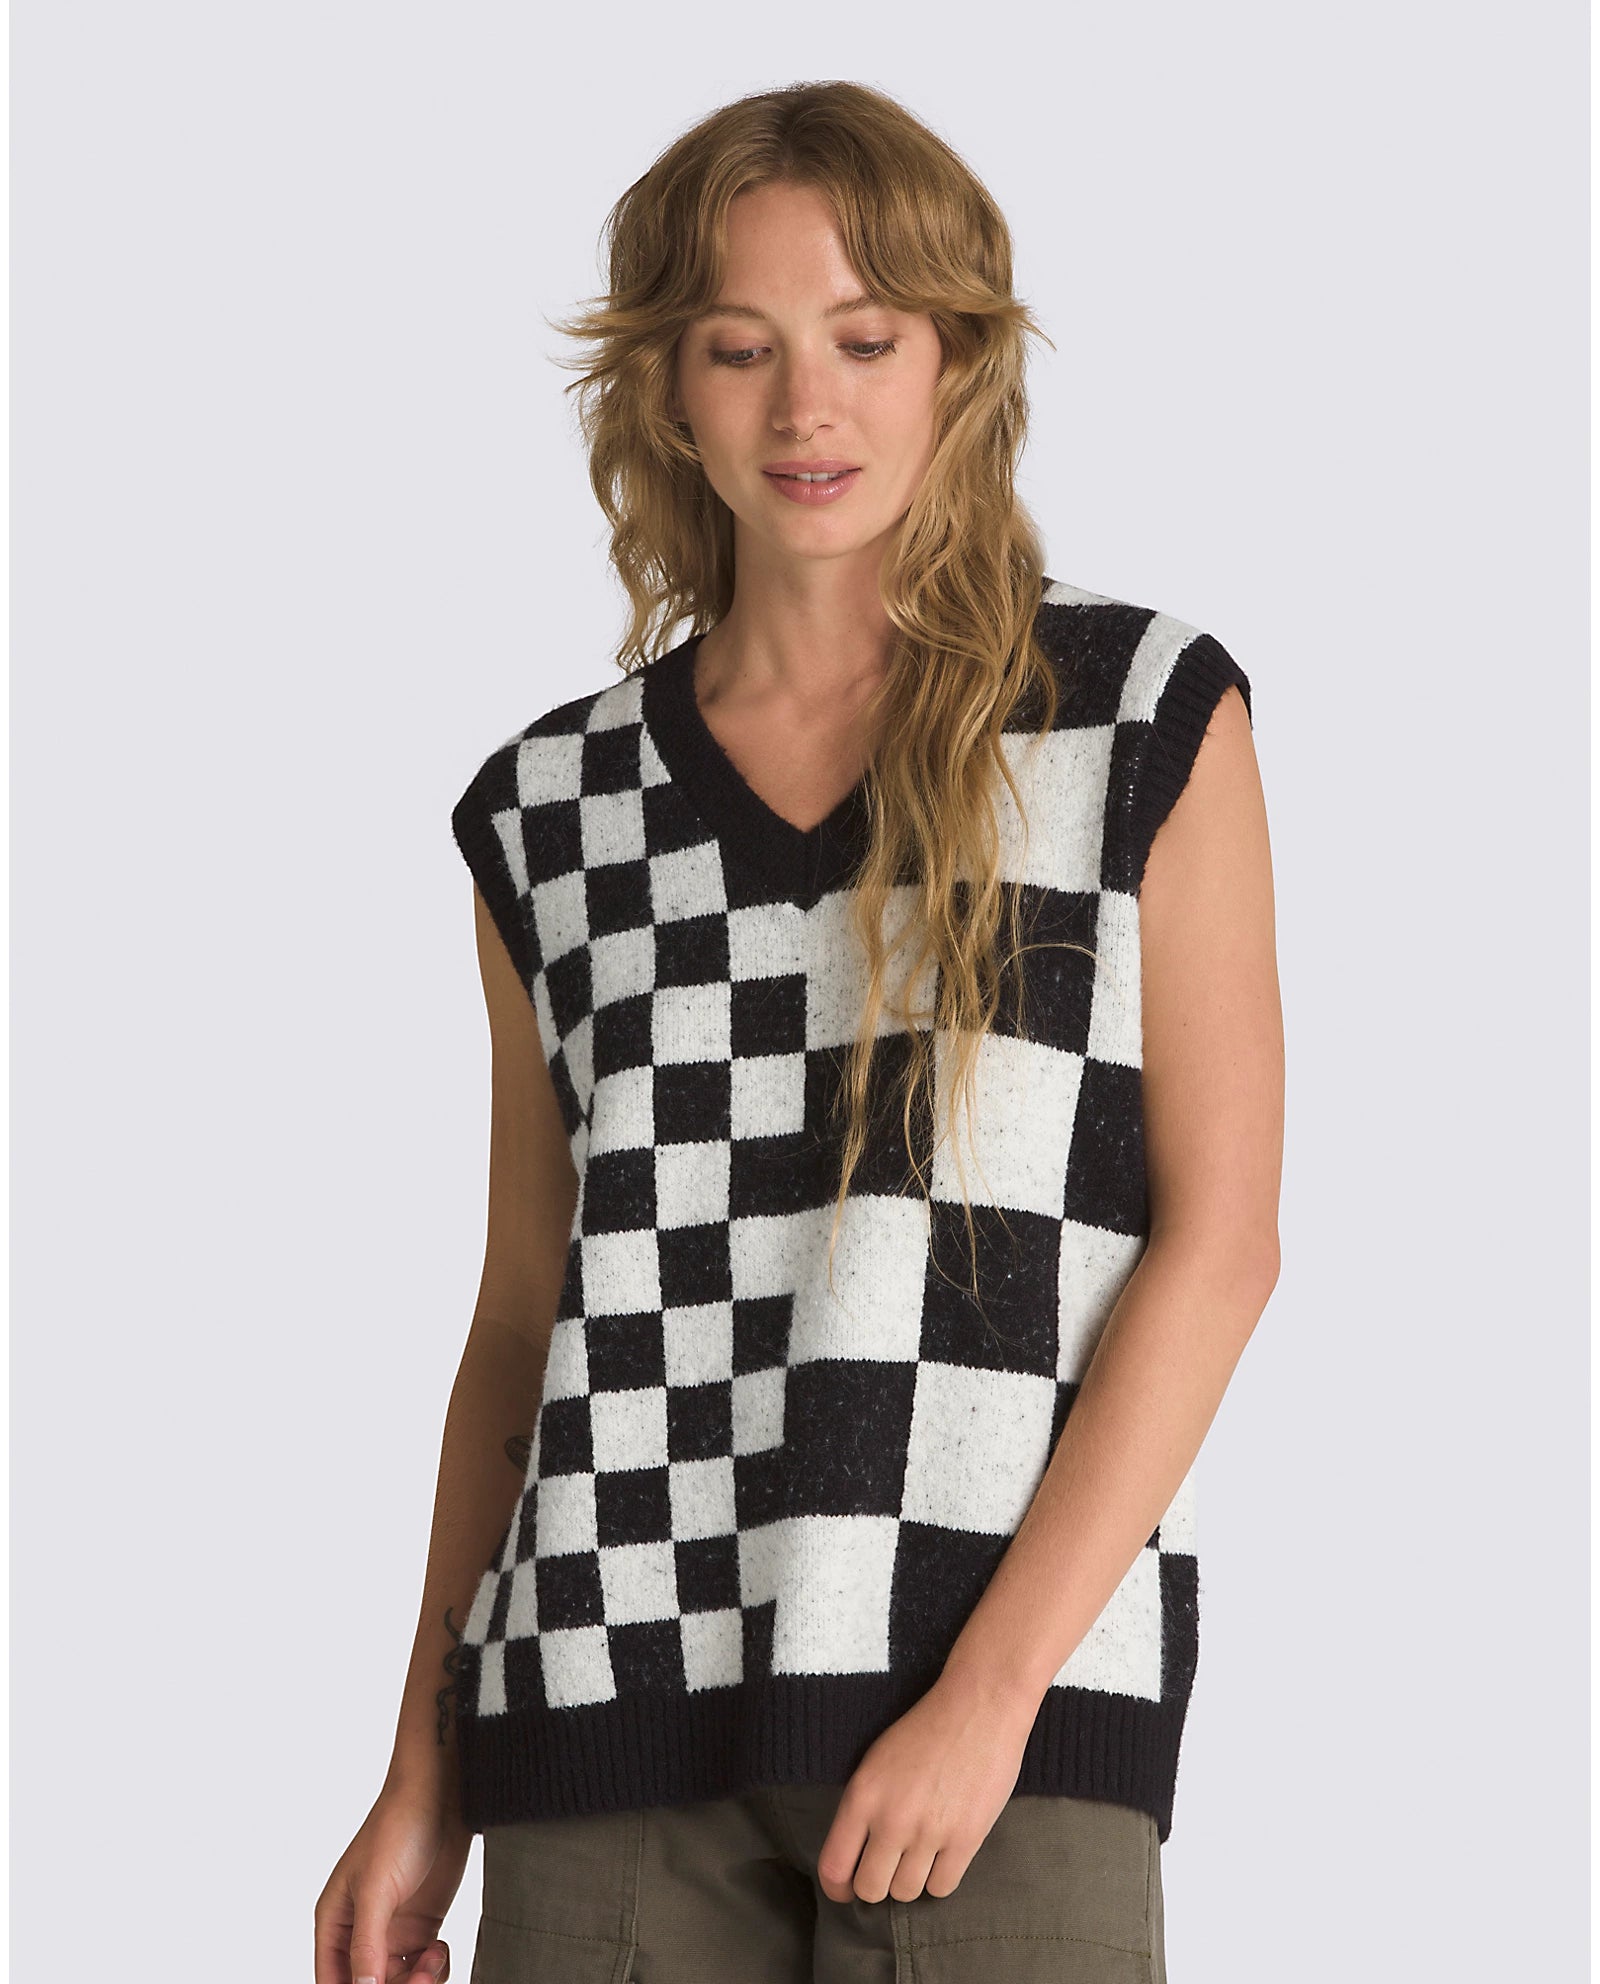 Vans Courtyard Sweater Vest - Black and White Layering Sweater Vest for  womens fall fashion – Sand Surf Co.